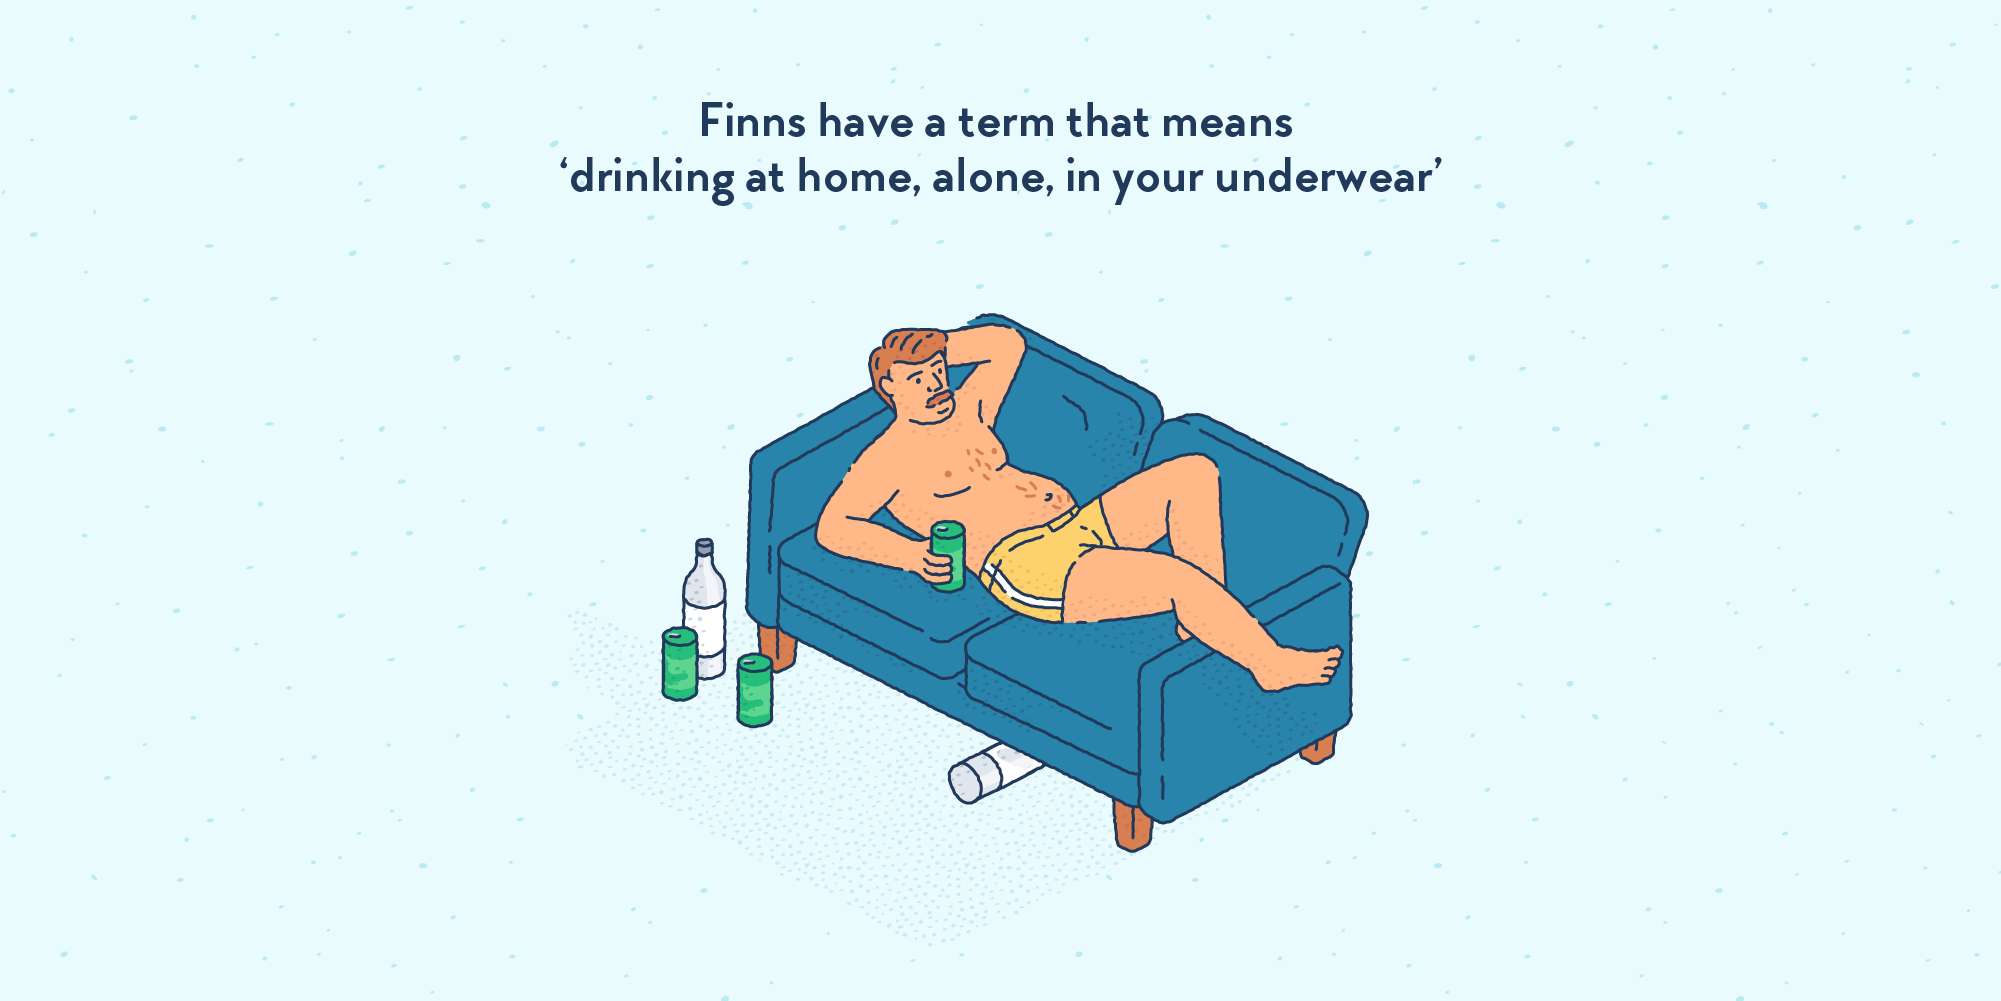 A man wearing only pants, slouching on the sofa drinking beers and vodka.